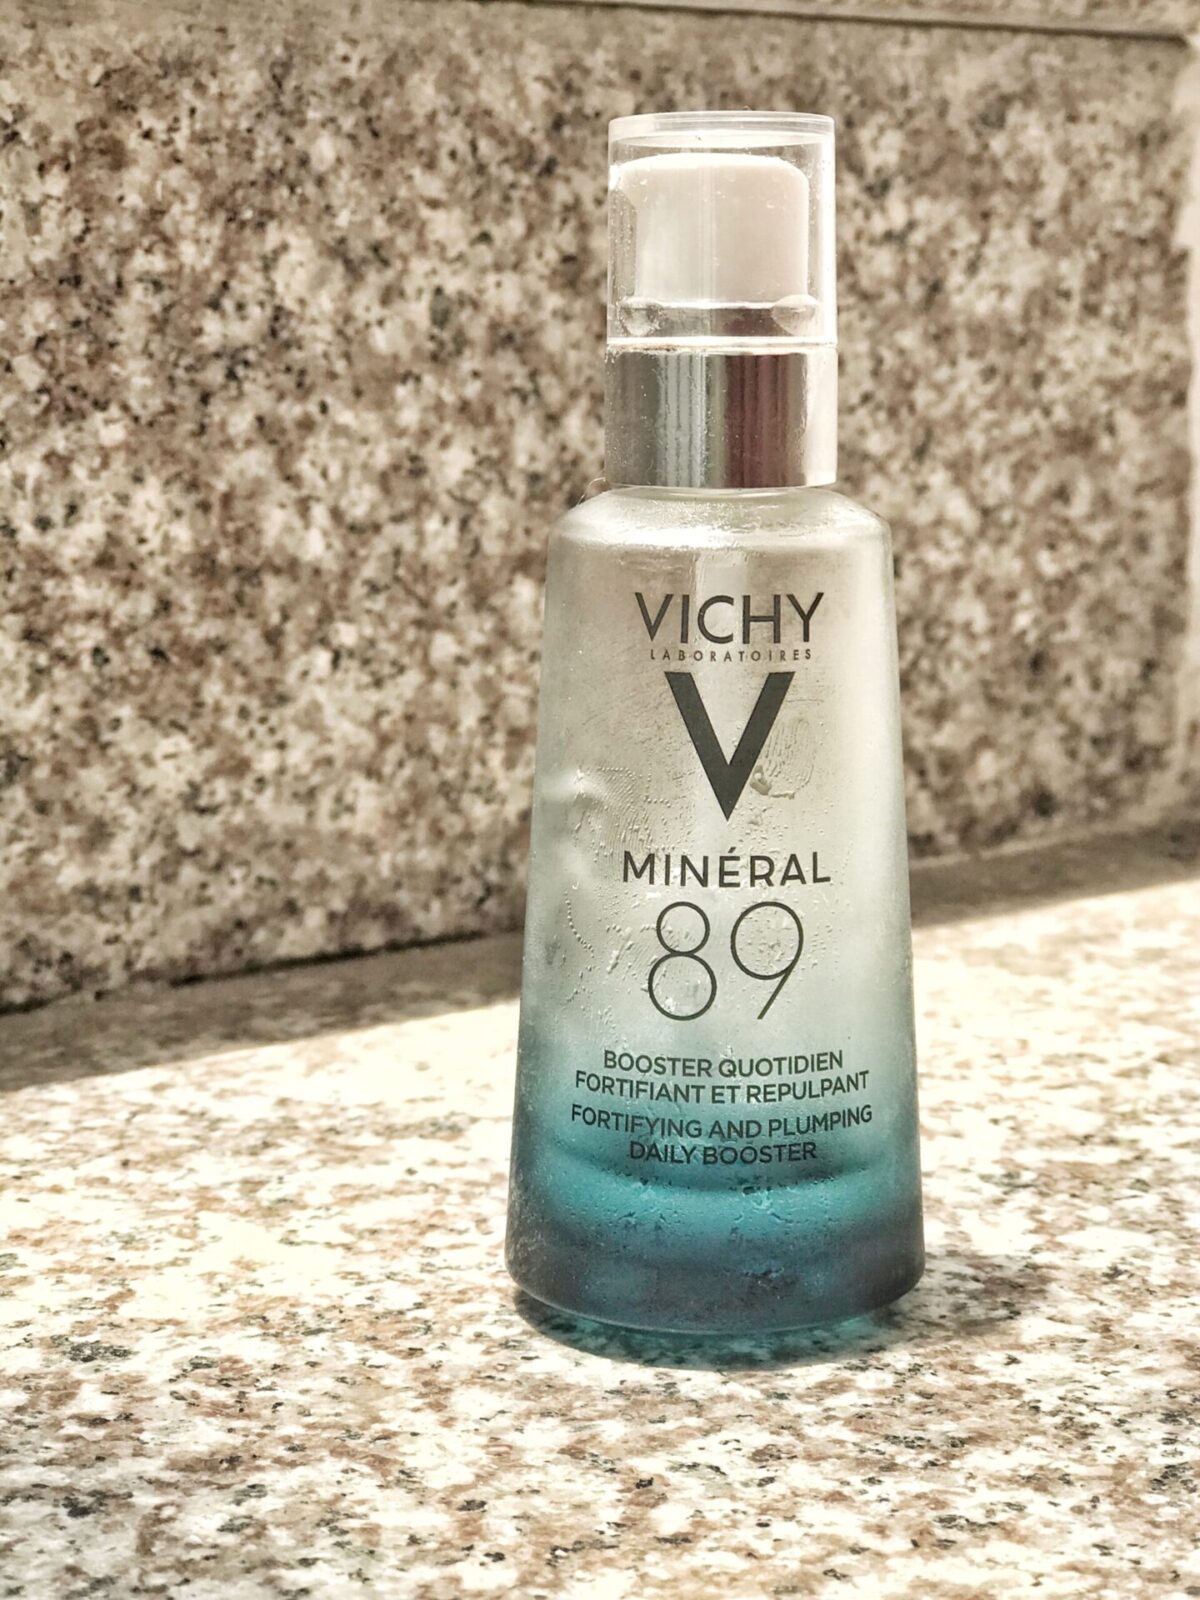 REVIEW DƯỠNG CHẤT VICHY MINERAL 89 BOOSTER 6